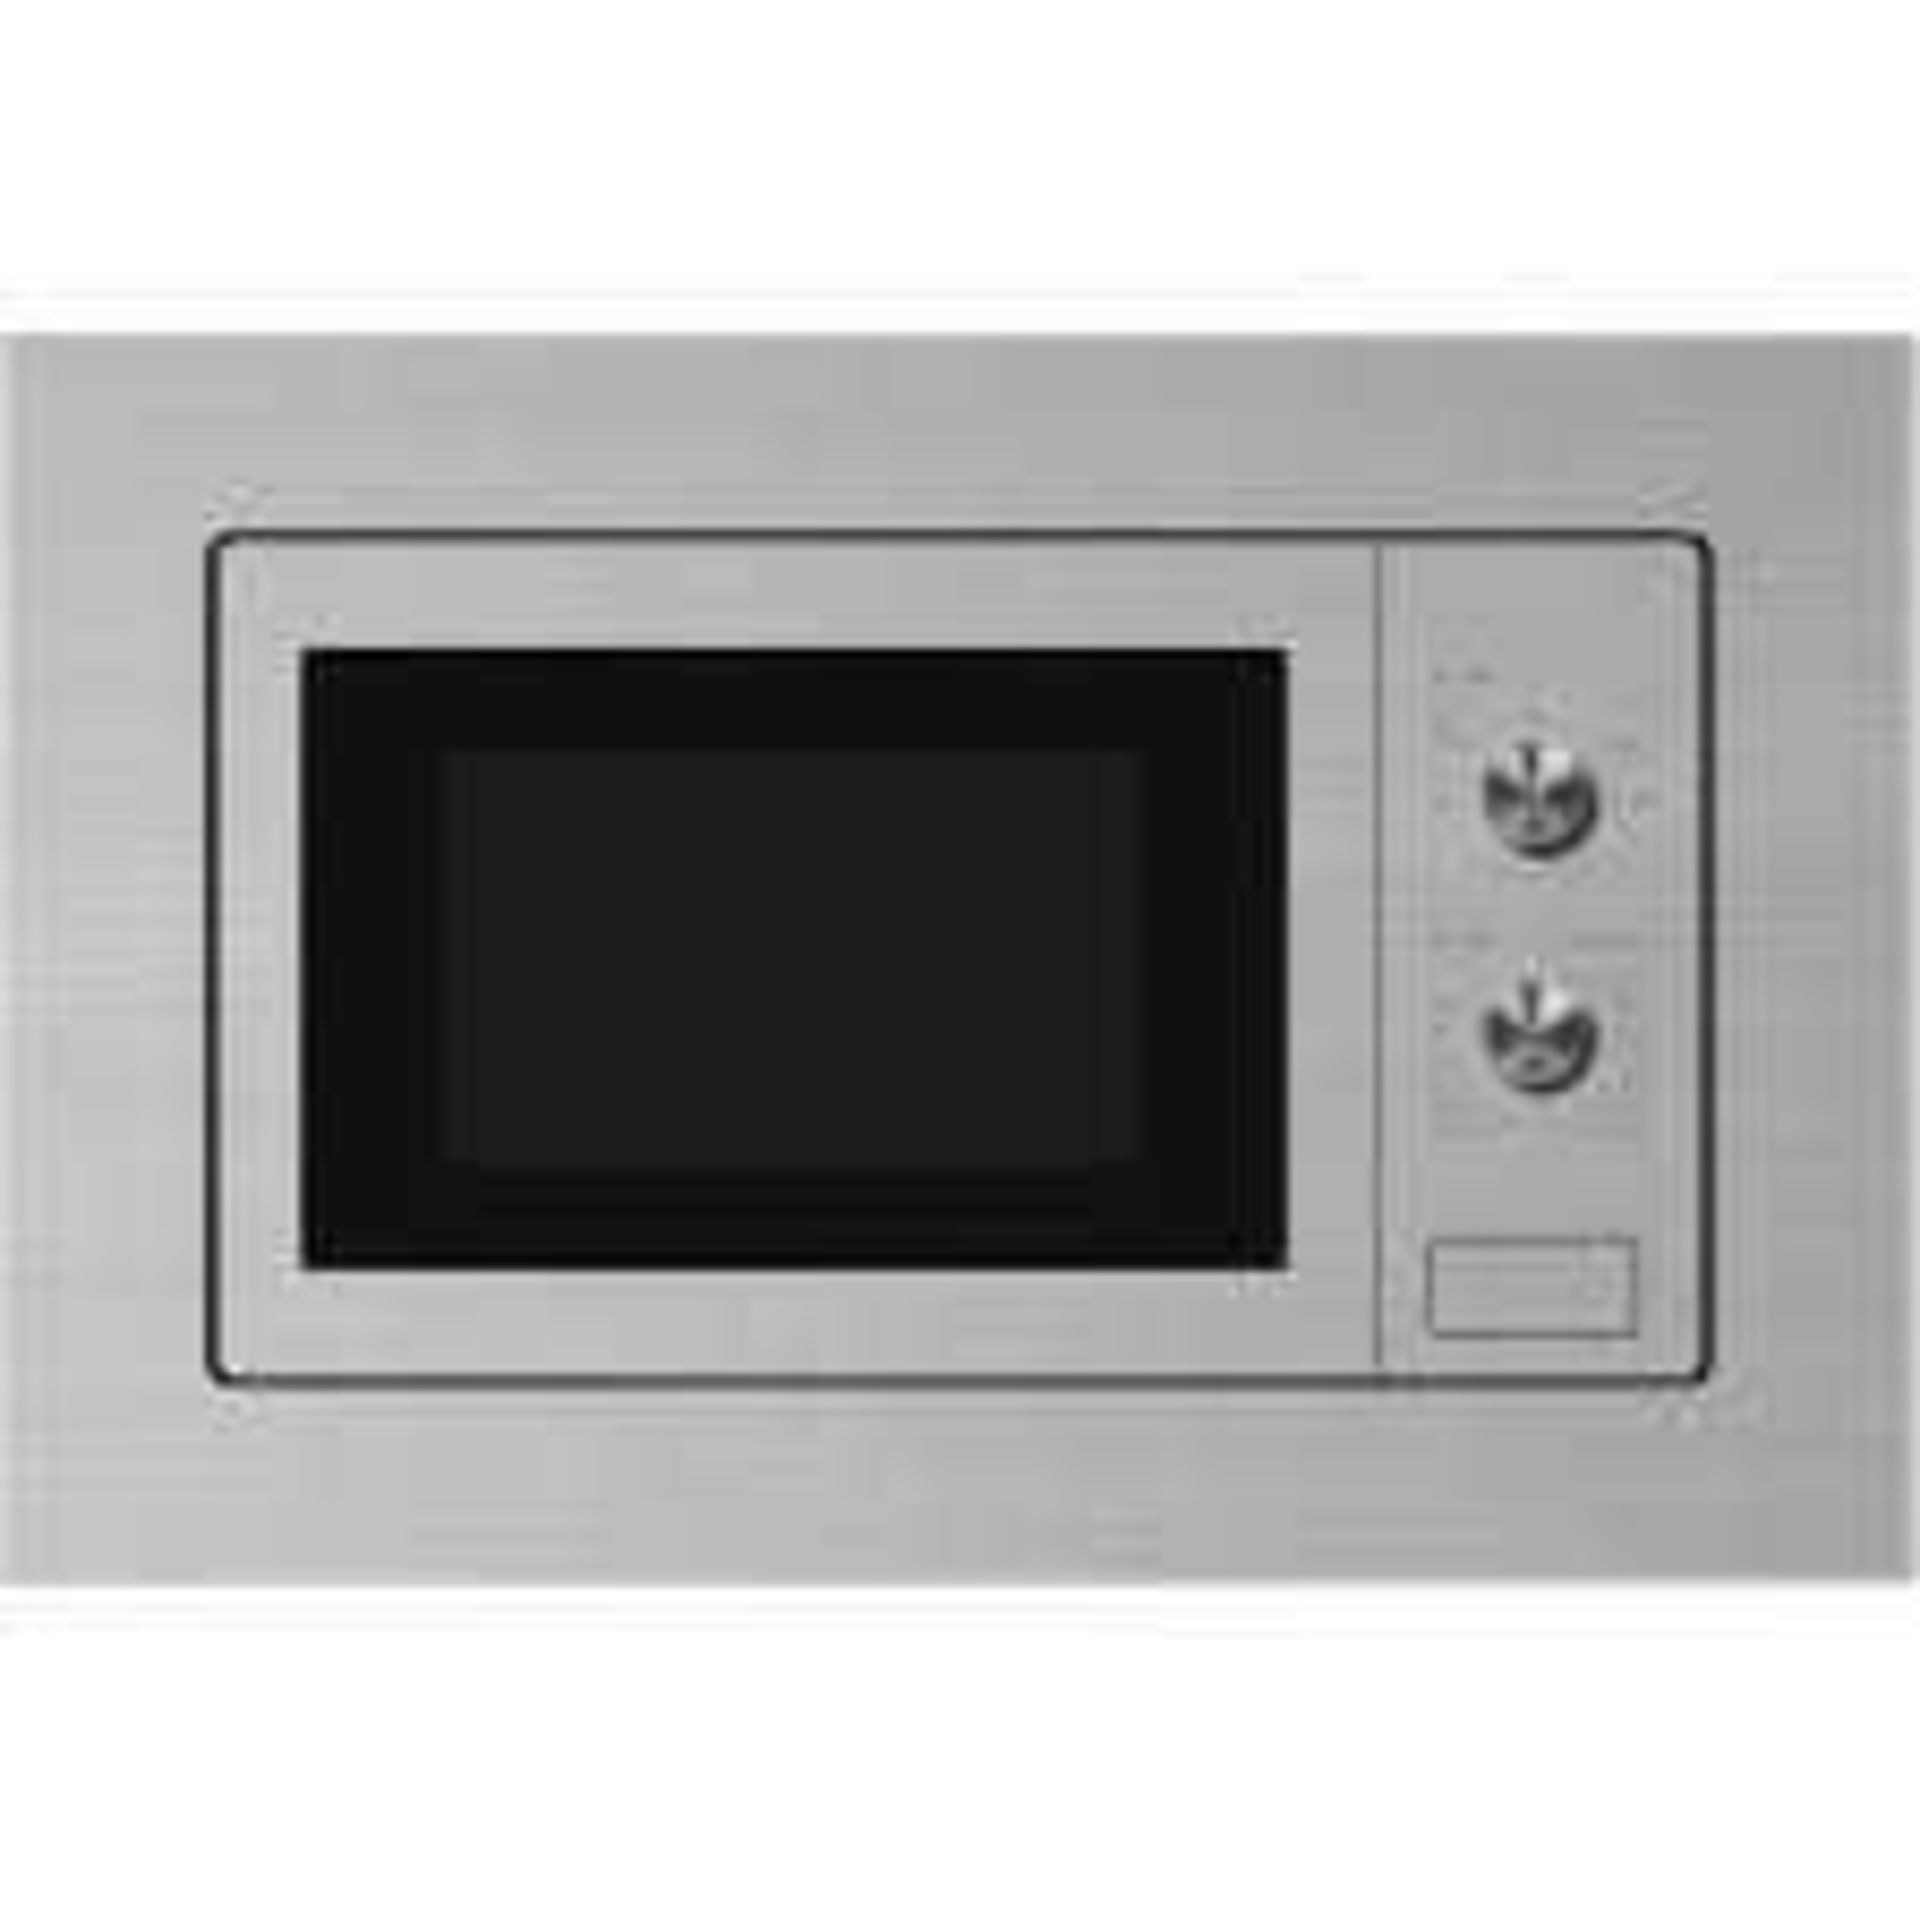 Rrp £180 Apelson Integrated Microwave Oven